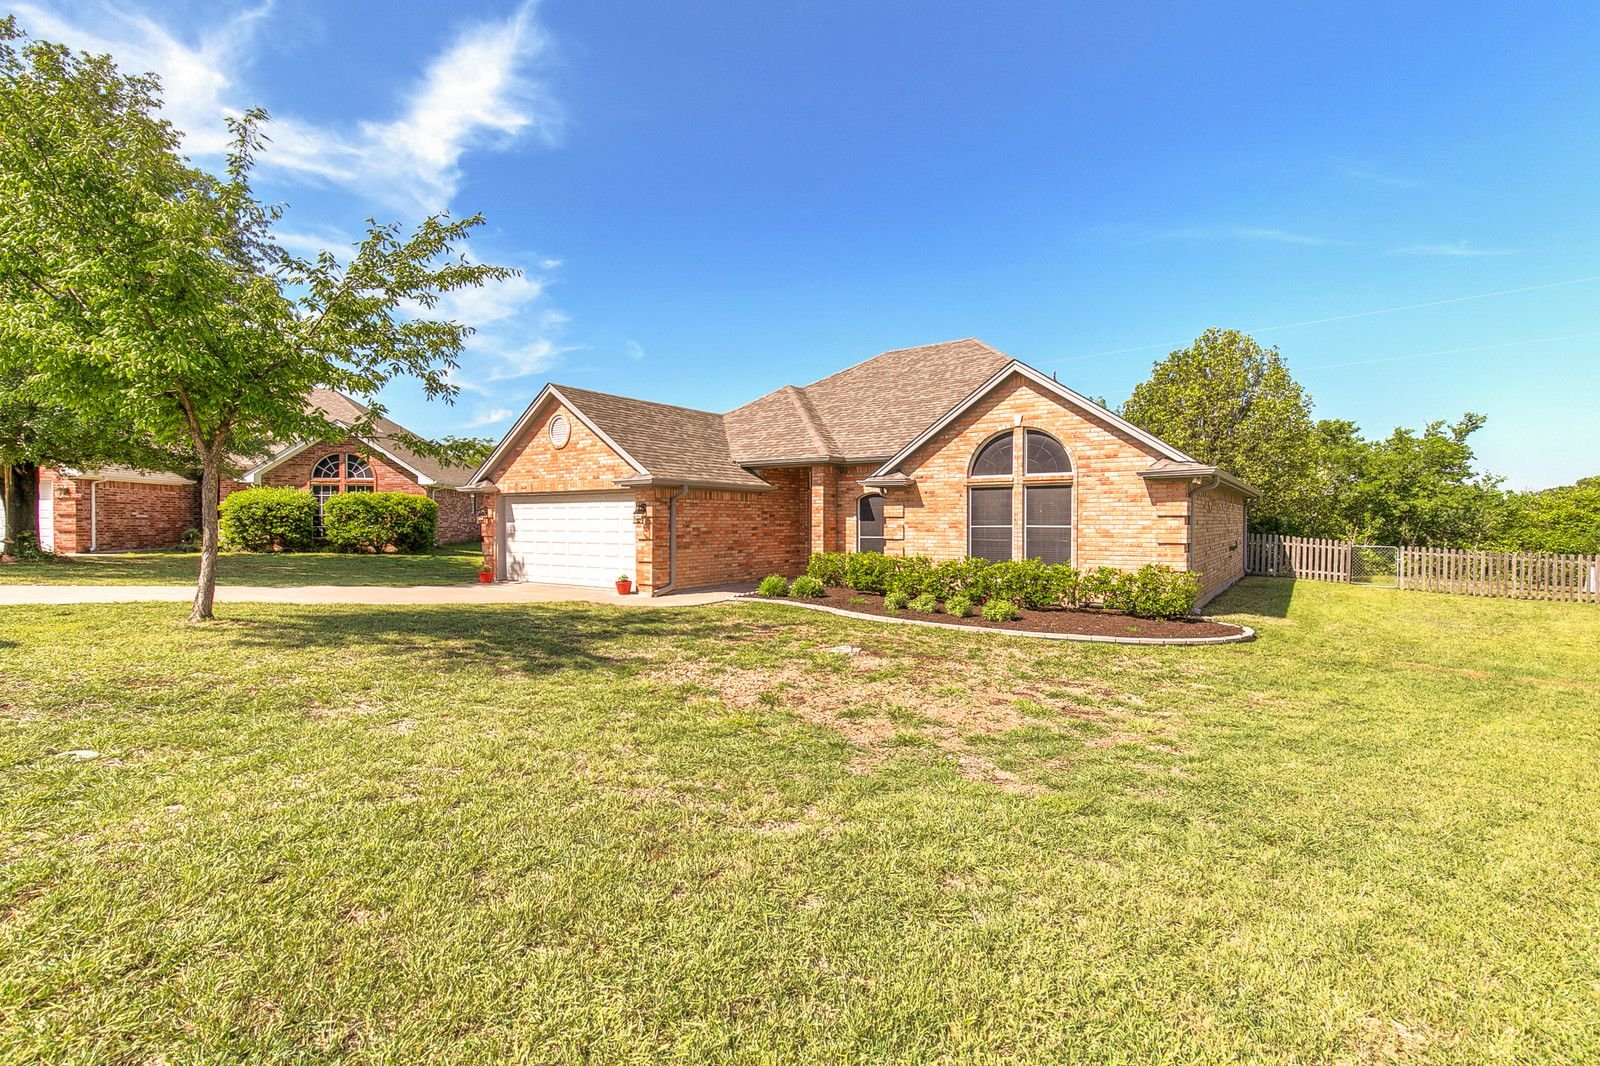 home for sale weatherford